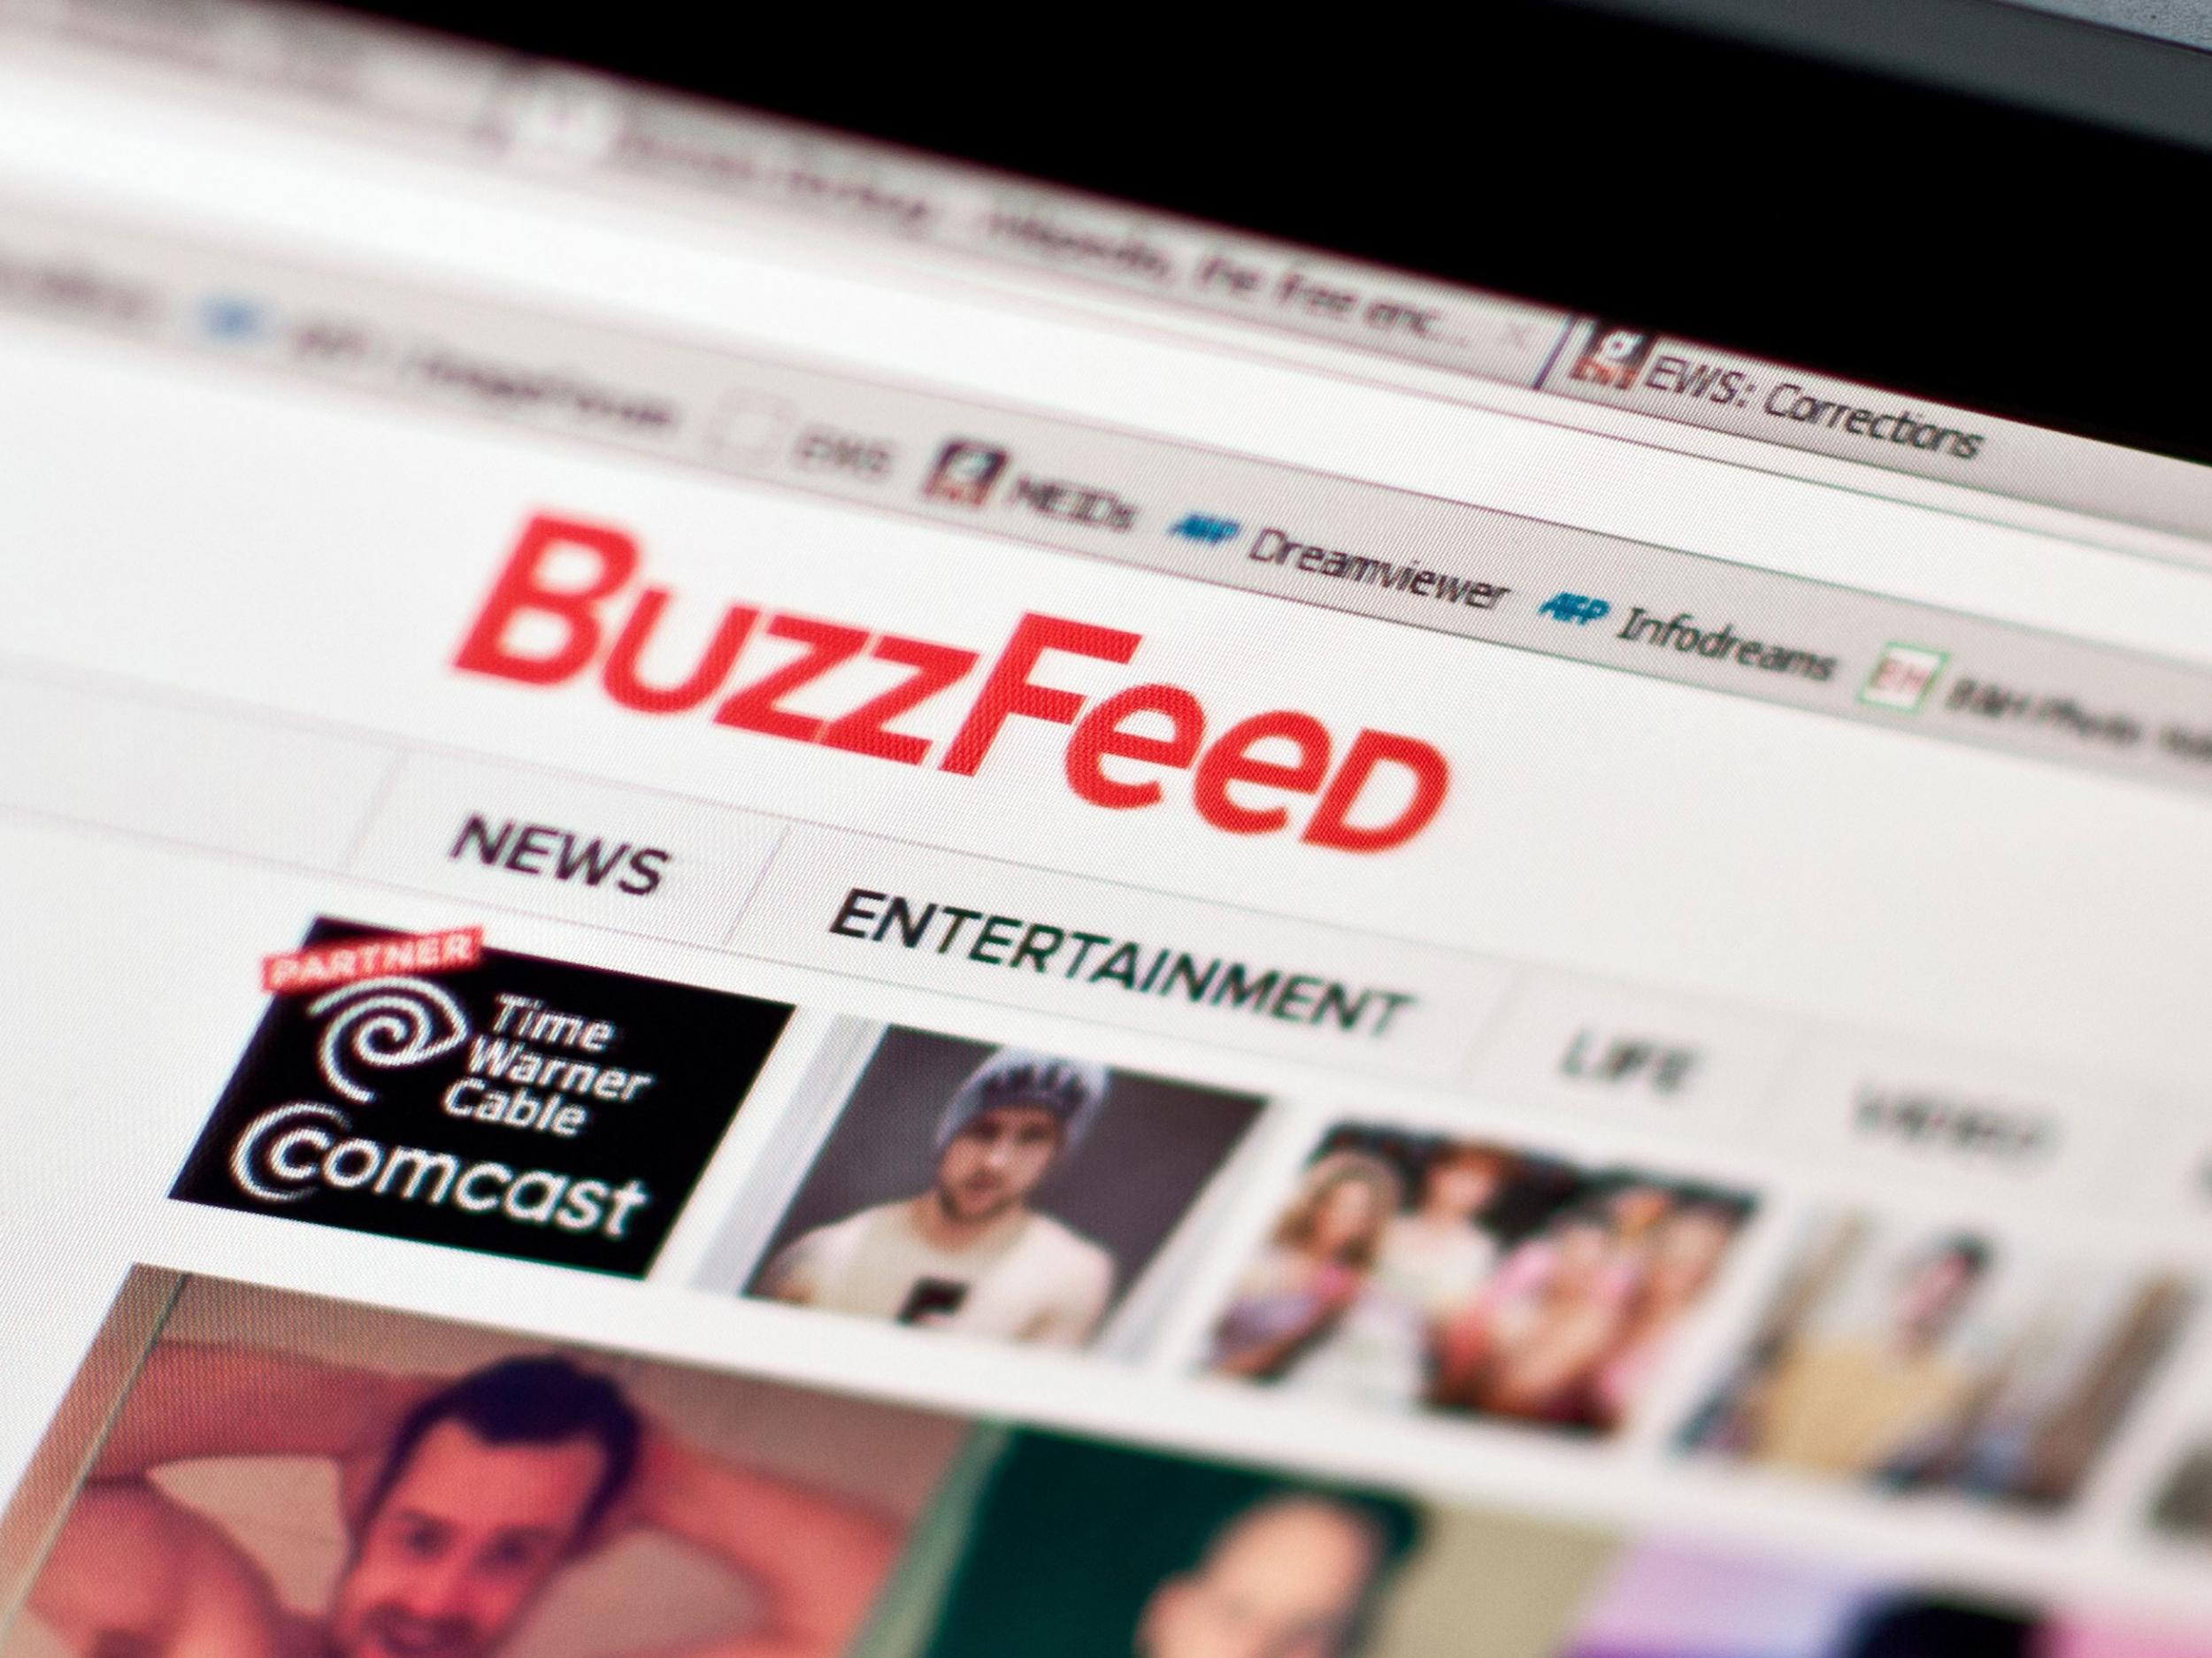 Buzzfeed is set to hire four new reporters to cover regions around the UK